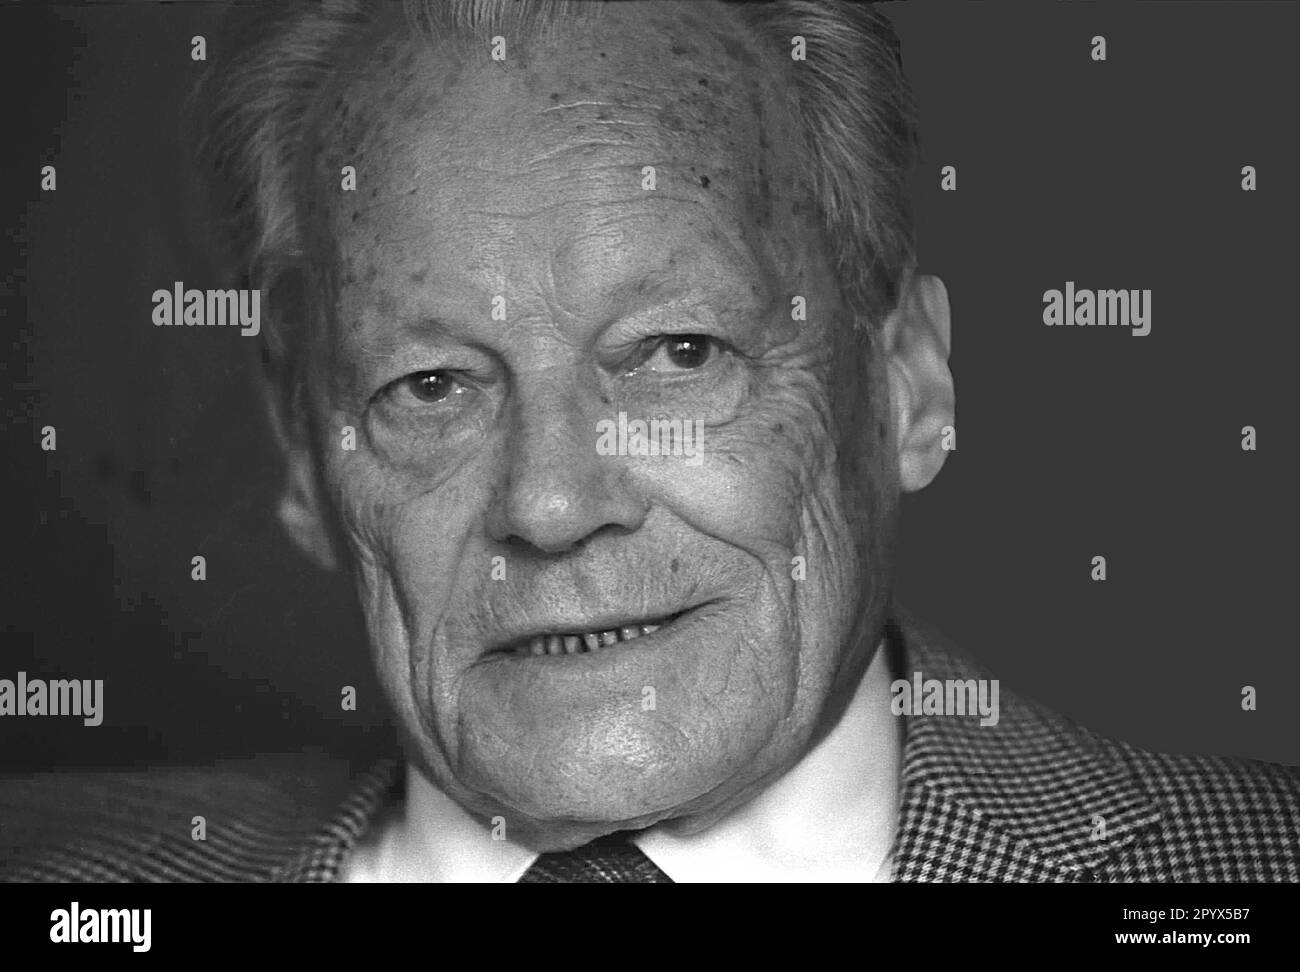 Germany, Bonn, 11.09.1991 100 years Willy Brandt Willy Brandt (born 18 December 1913 in Lübeck as Herbert Ernst Karl Frahm,   October 8, 1992 in Unkel) was a German Social Democratic politician. He was from 1957 to 1966 Mayor of Berlin, 1966-1969 Federal Foreign Minister and Deputy Chancellor and the Cabinet Kiesinger 1969-1974 fourth Chancellor of the Federal Republic of Germany. For his Ostpolitik, which focused on relaxation and balance with the Eastern European States, he received the 1971 Nobel Peace Prize. From 1964 to 1987, Brandt, chairman of the SPD, 1976-1992 President of the Stock Photo